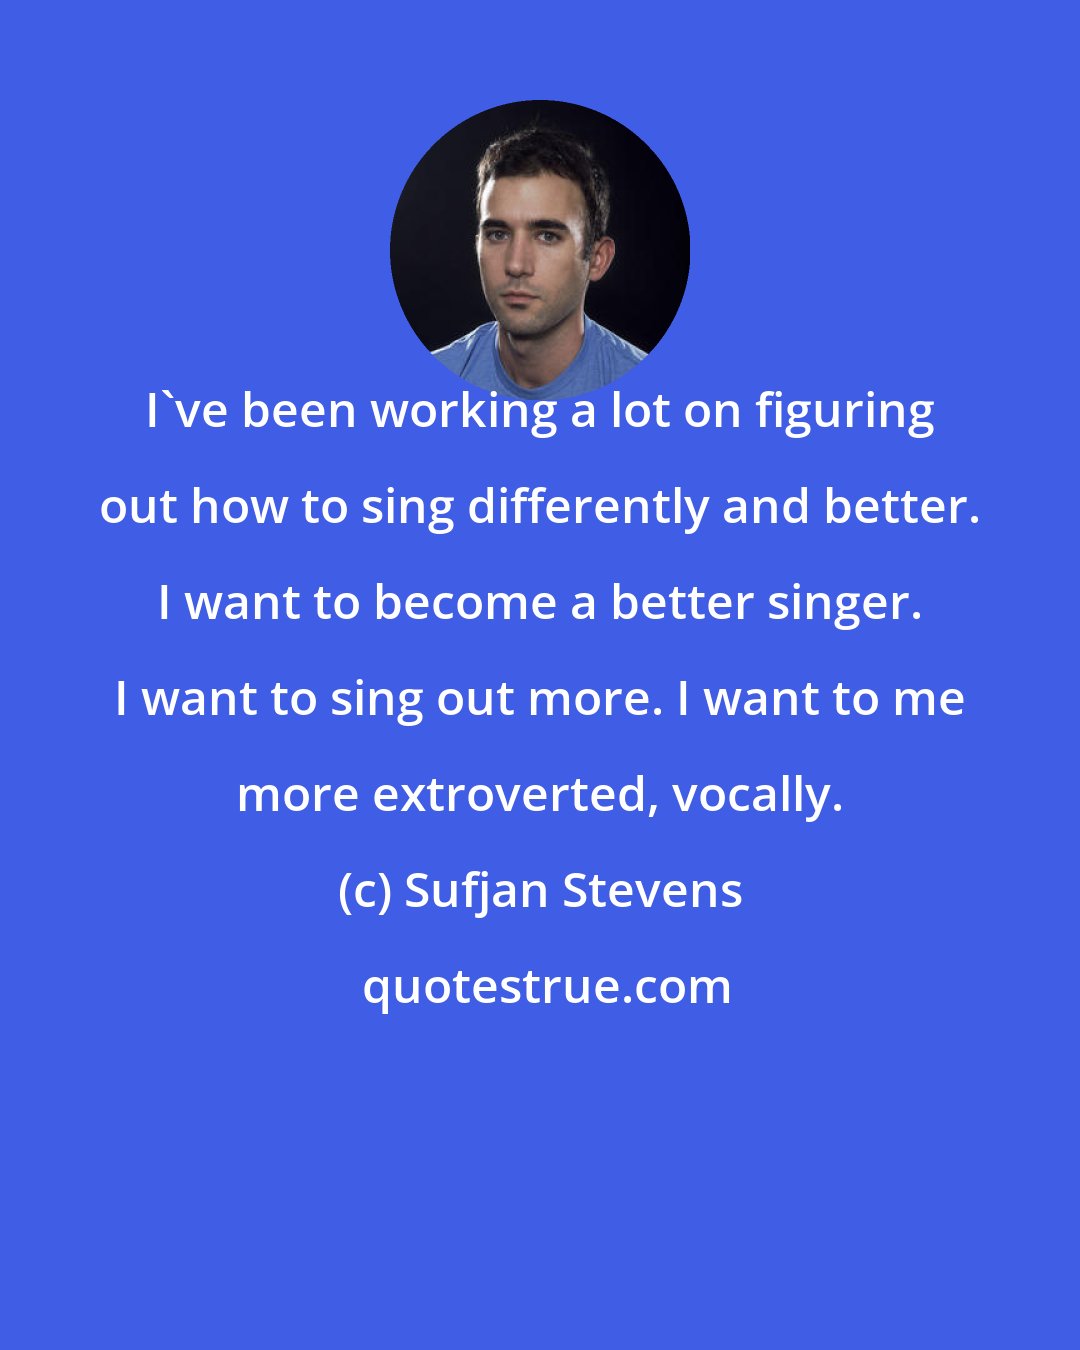 Sufjan Stevens: I've been working a lot on figuring out how to sing differently and better. I want to become a better singer. I want to sing out more. I want to me more extroverted, vocally.